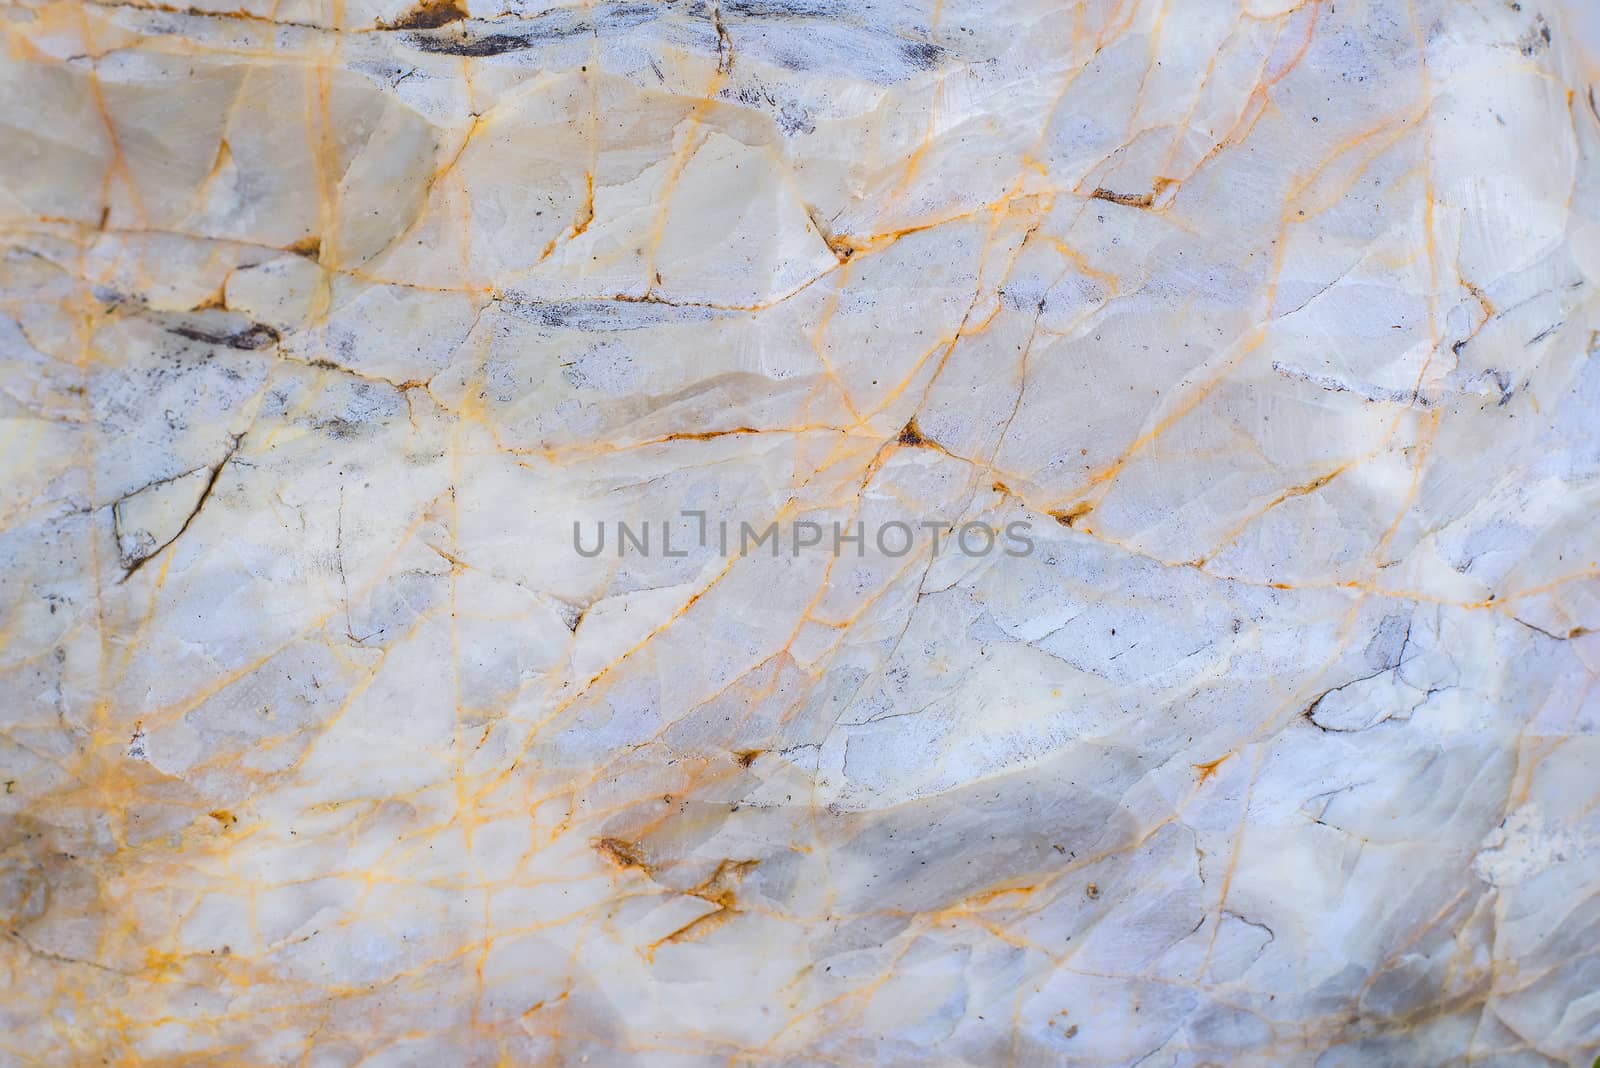 White marble  texture background